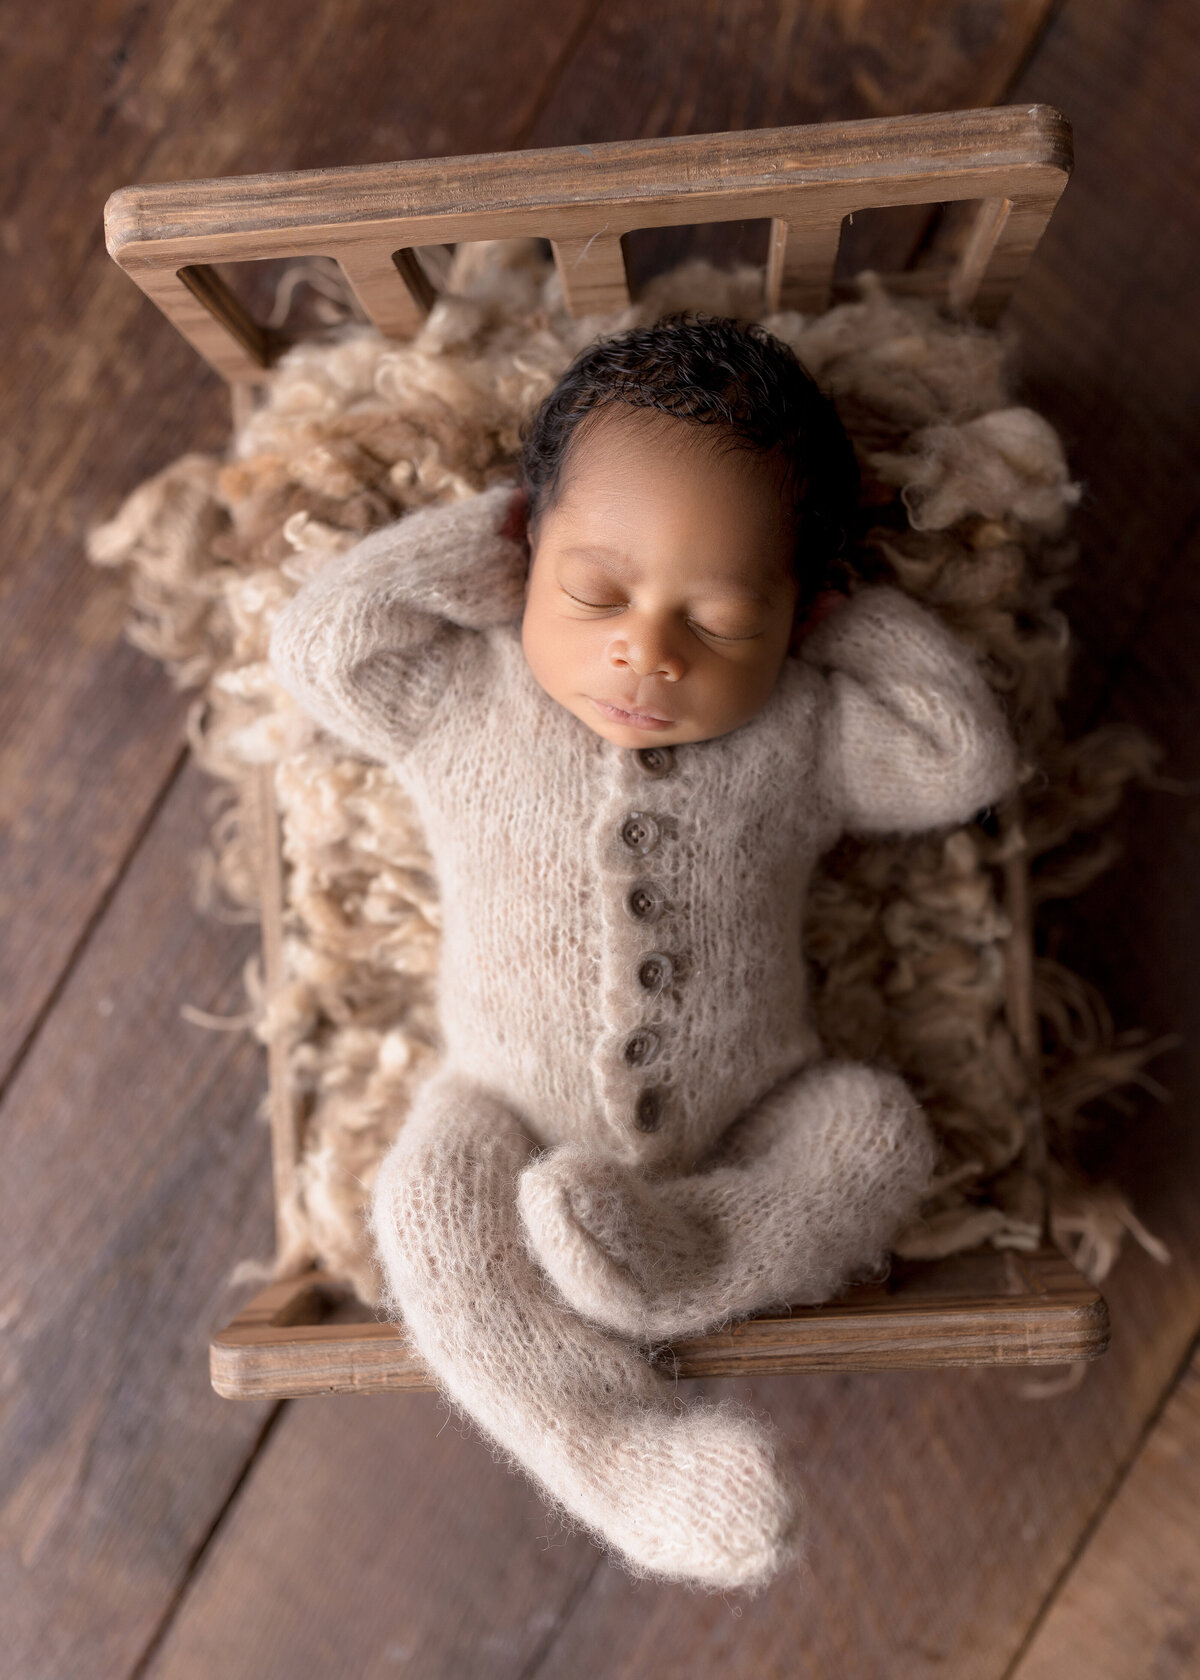 Newborn photoshoot in West Palm Beach Florida. Black baby is wearing a one piece cream-colored knit one-piece outfit laying on his back on a newborn bed prop. Aerial image. Baby's hands are resting under his head and his legs are sprawled atop of the foot of the miniature bed.